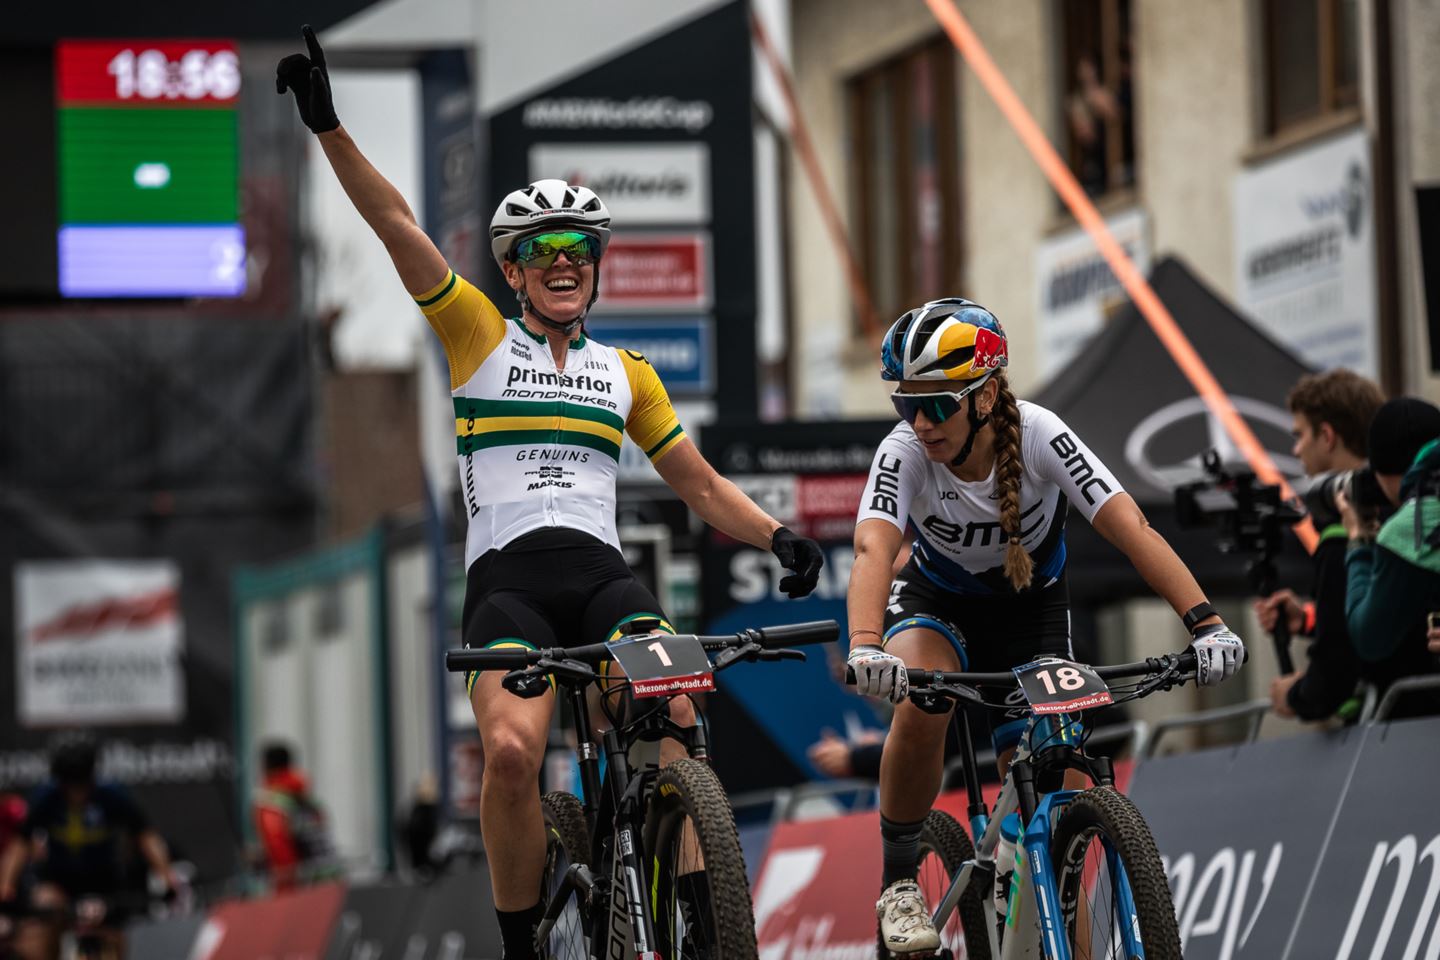 Rebecca McConnell and Pauline Ferrand-Prevot crossing the finishing line of Albstadt XCC.